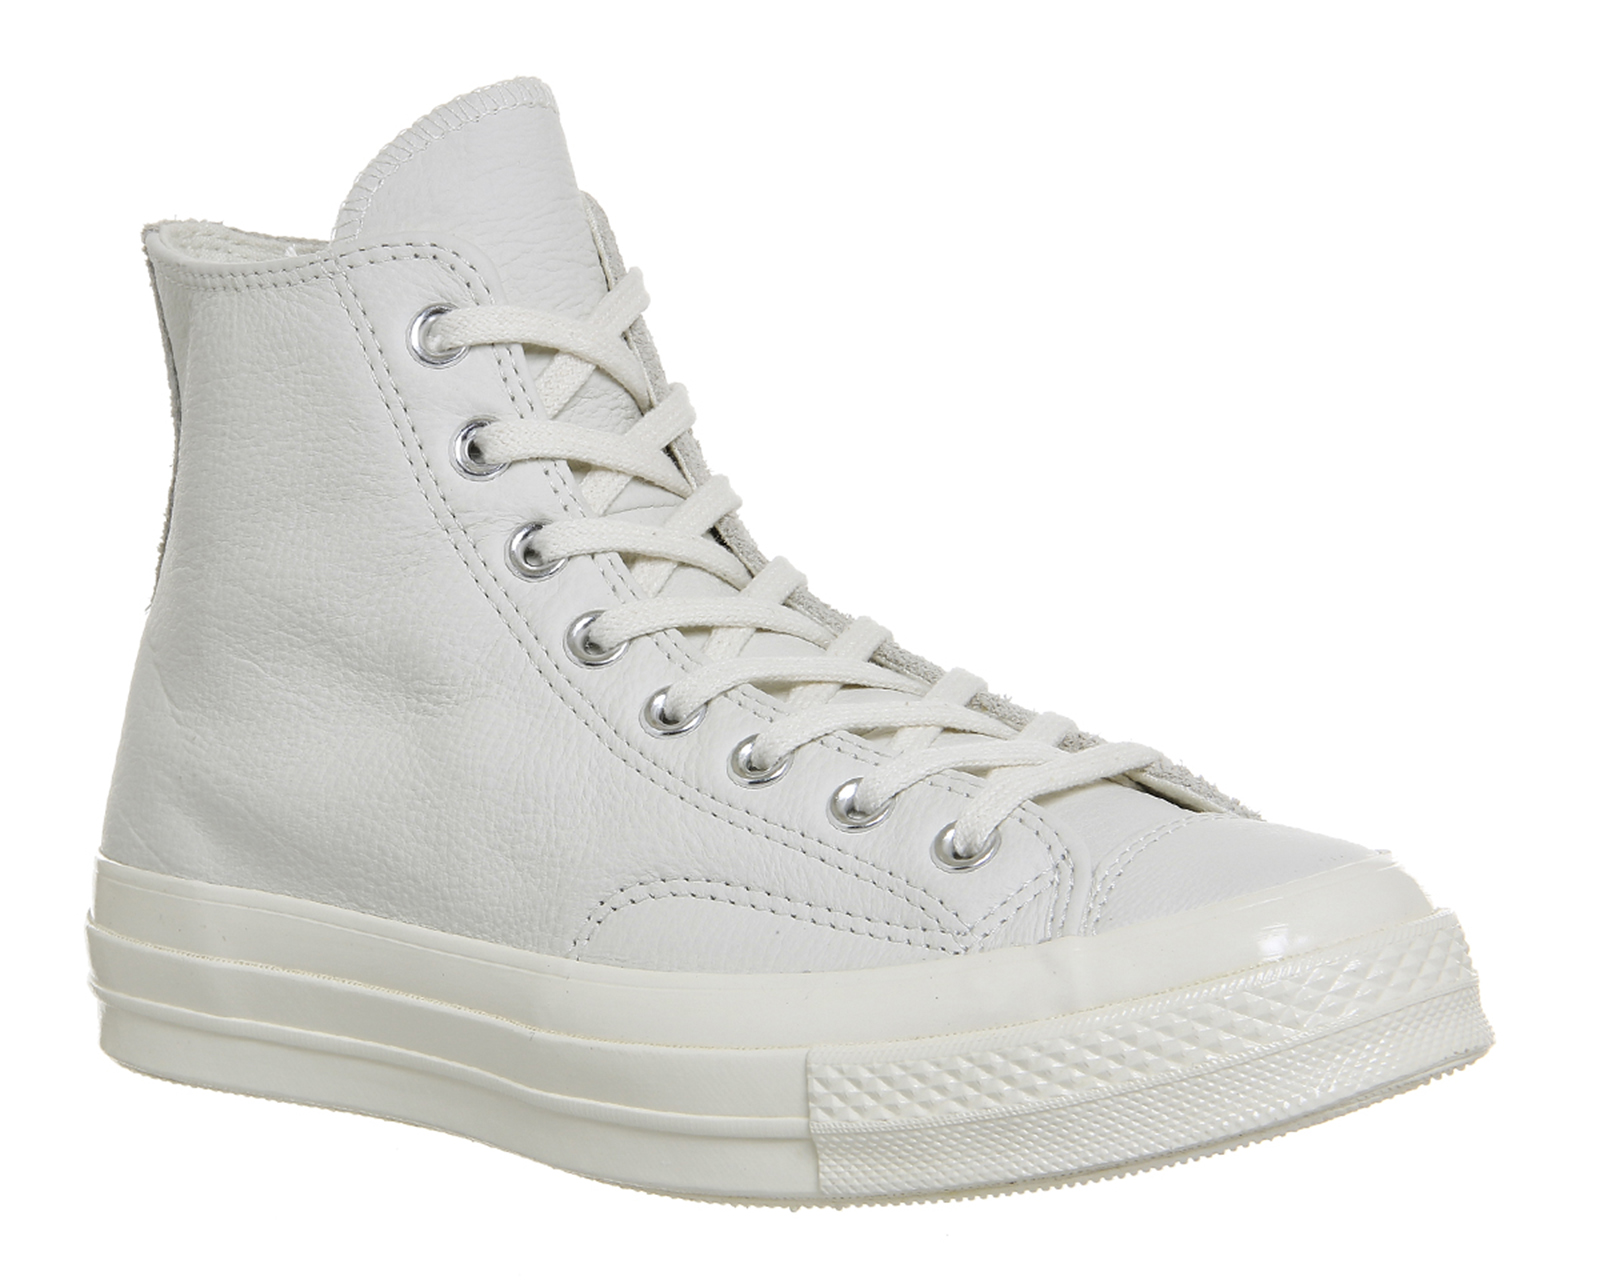 converse all star hi 70's leather